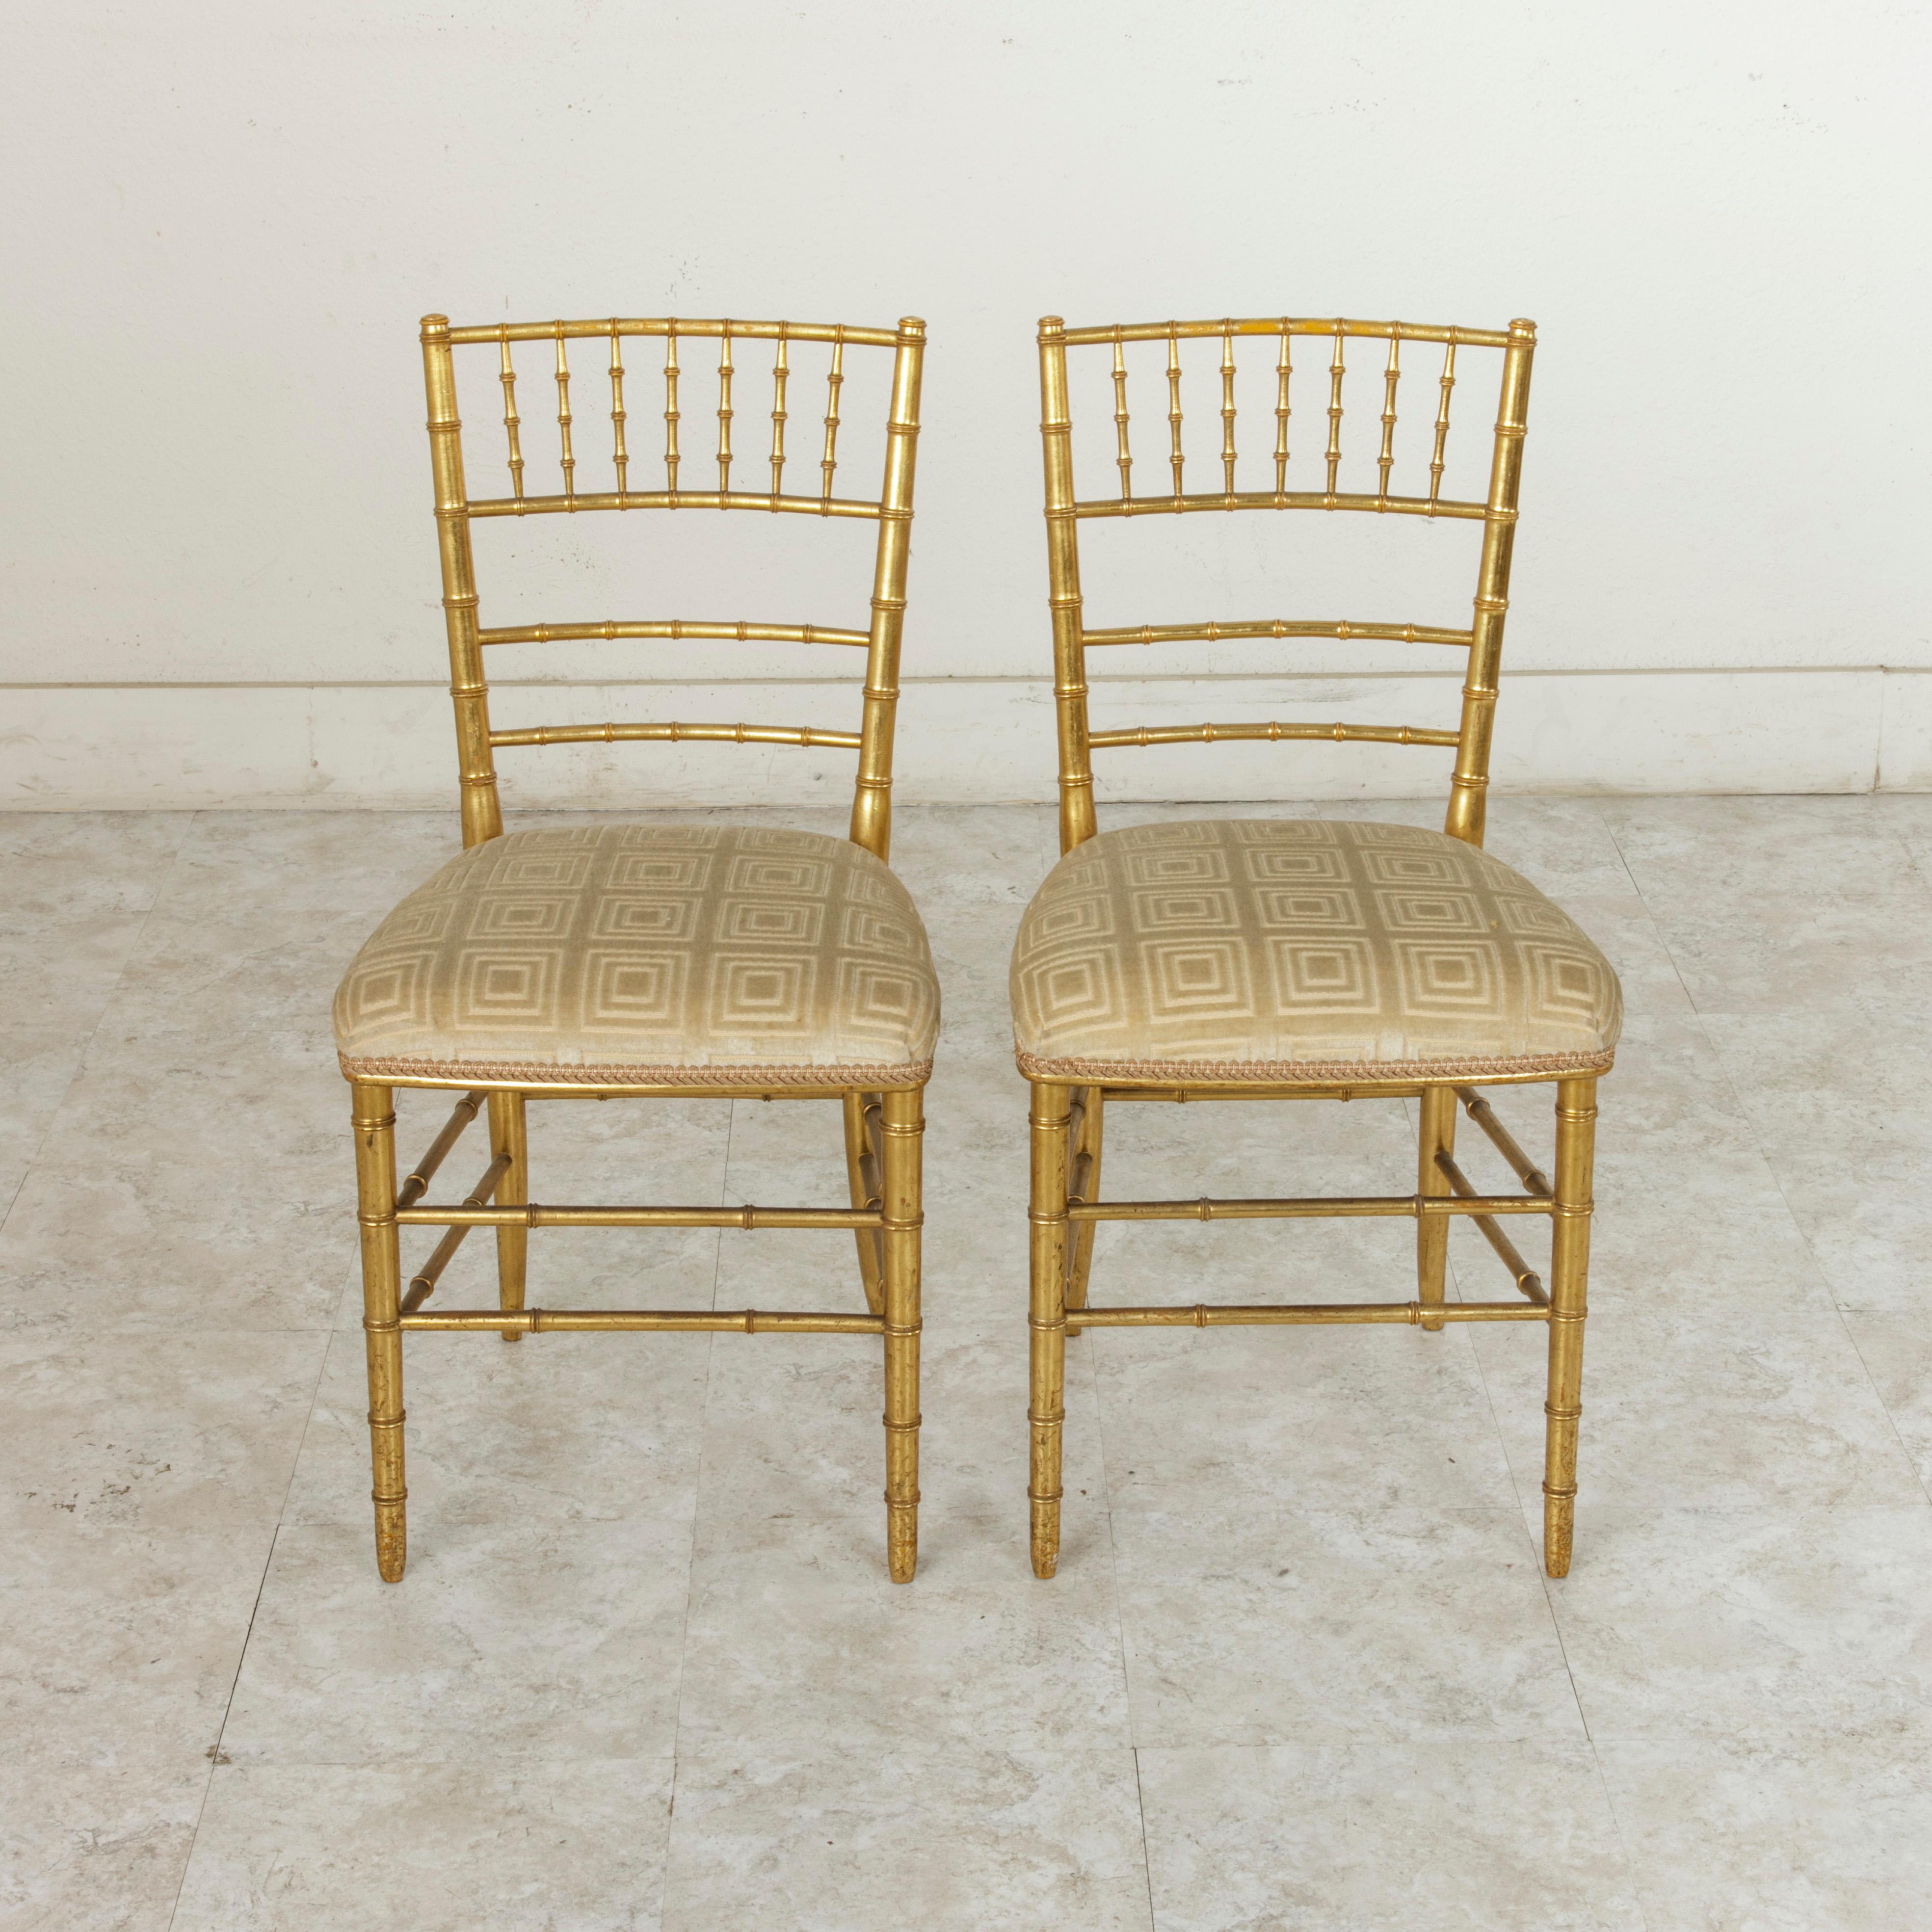 This pair of French opera chairs from the turn of the 20th century features a giltwood faux bamboo frame. The top of the ladder back is finished with vertical supports that juxtapose the reoccurring horizontals of the seat back. The seats are